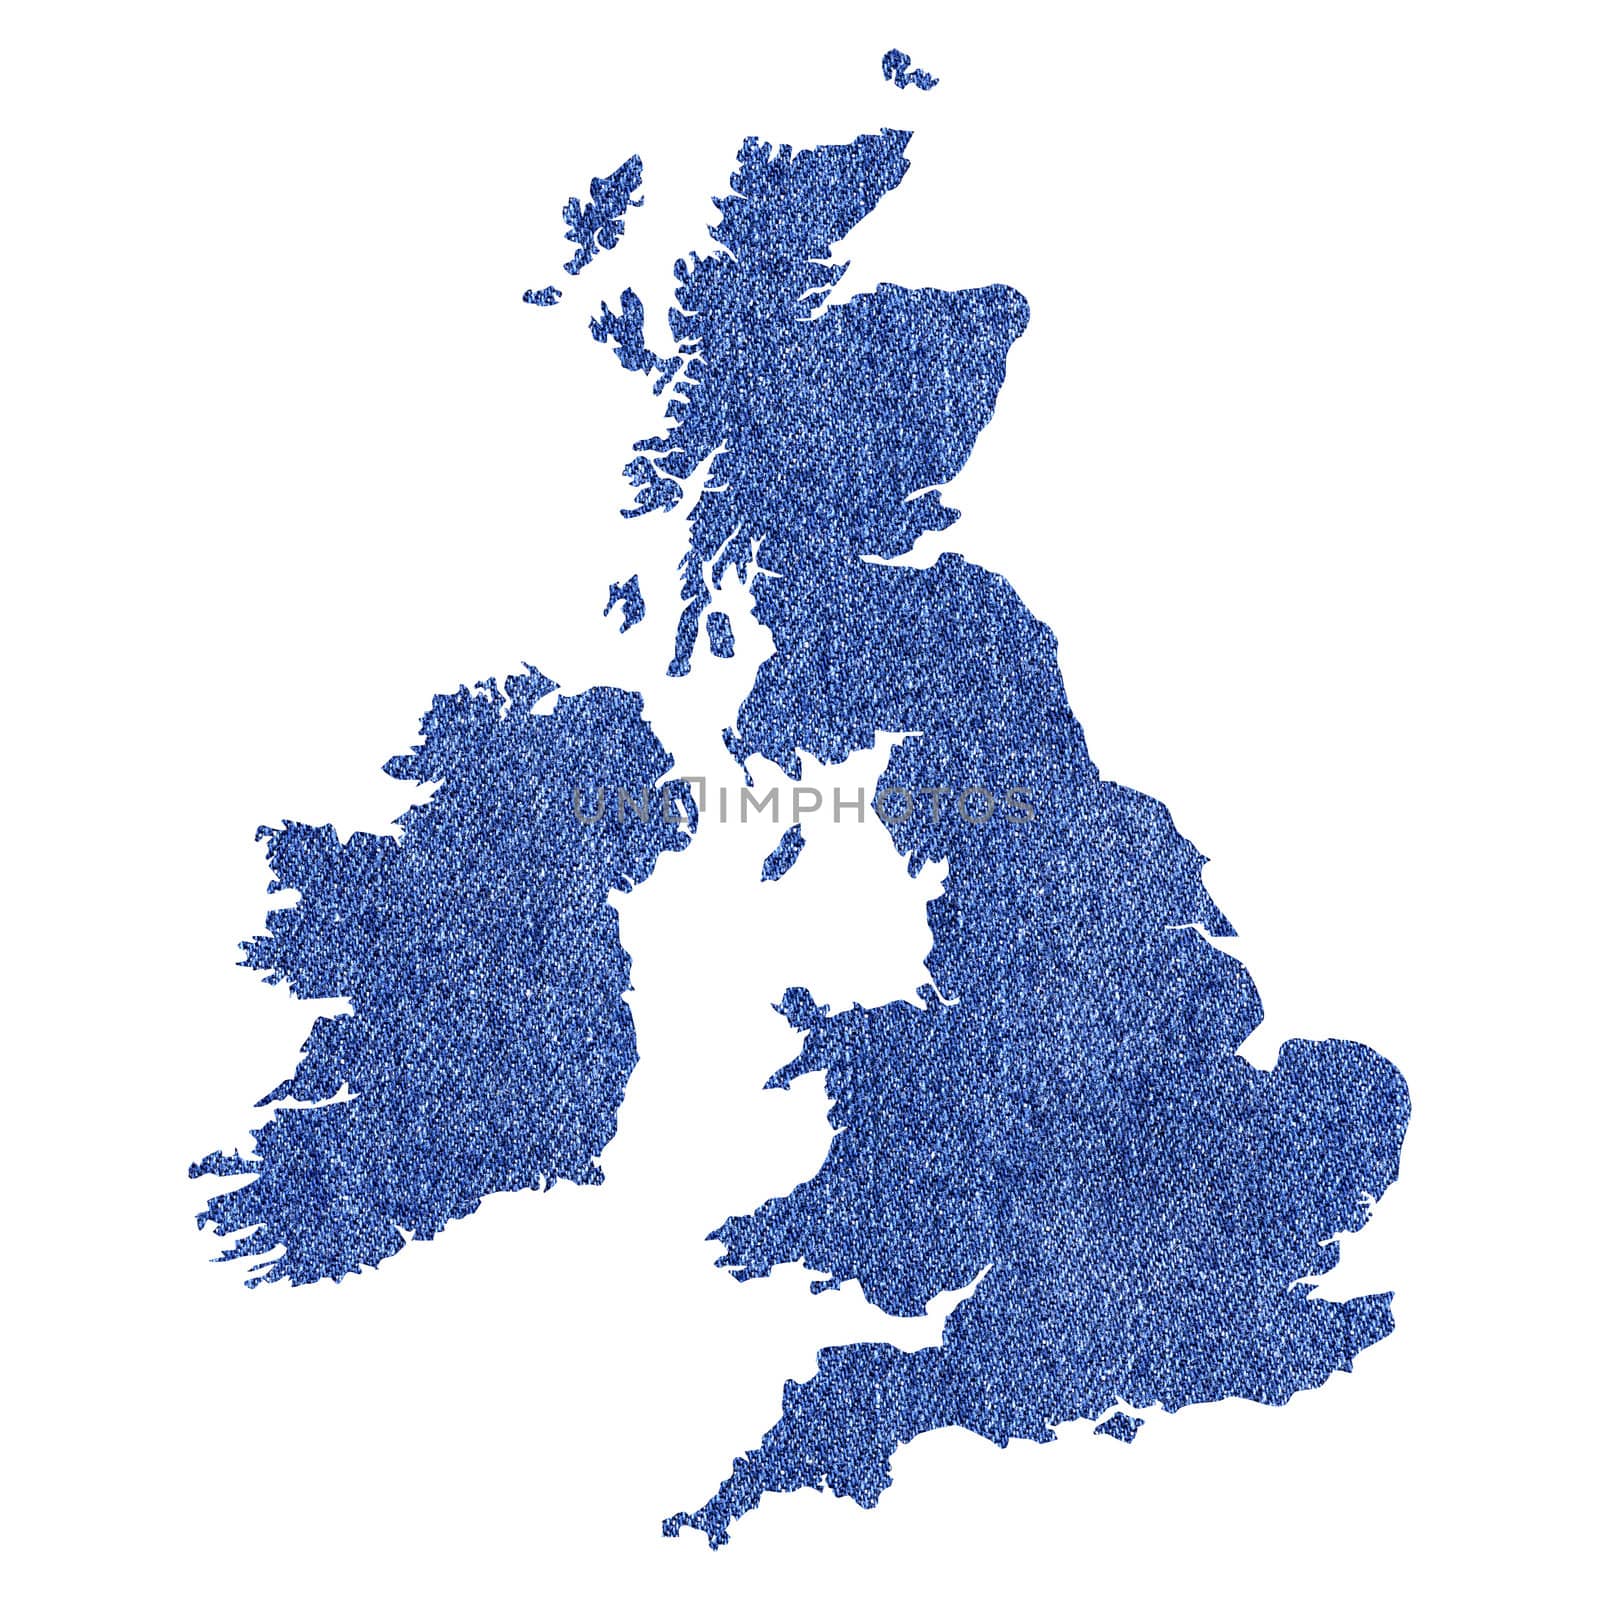 UK and Ireland map with jeans background